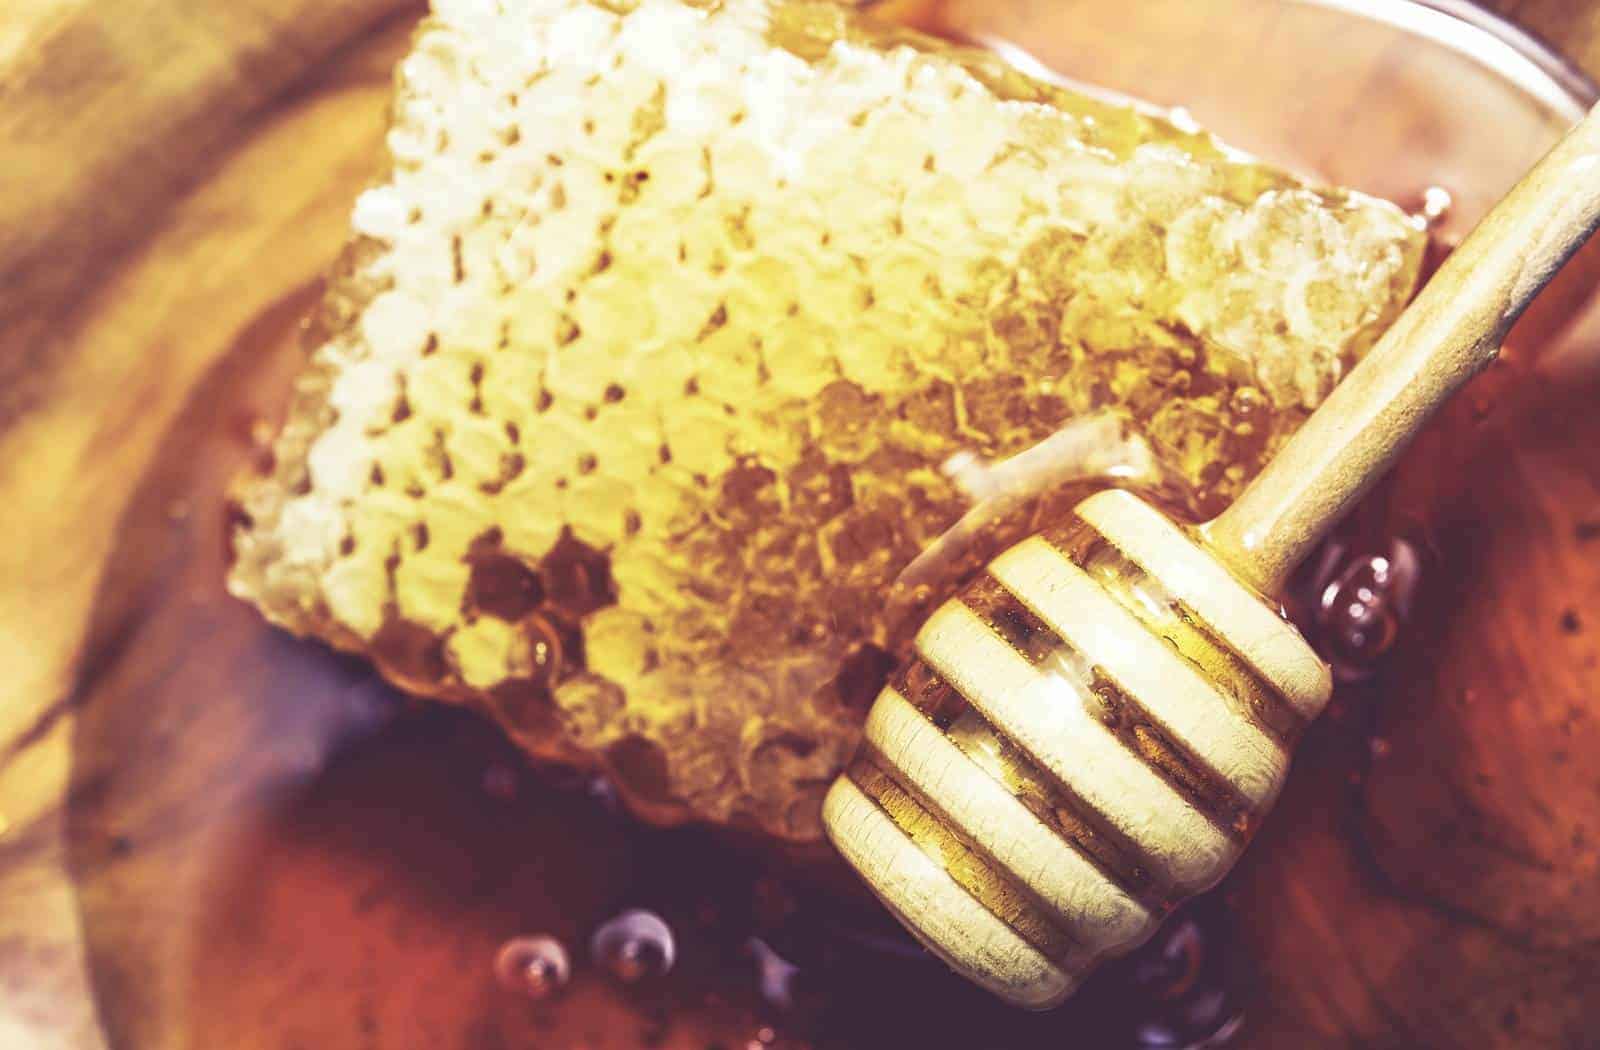 Can honey make you fat?